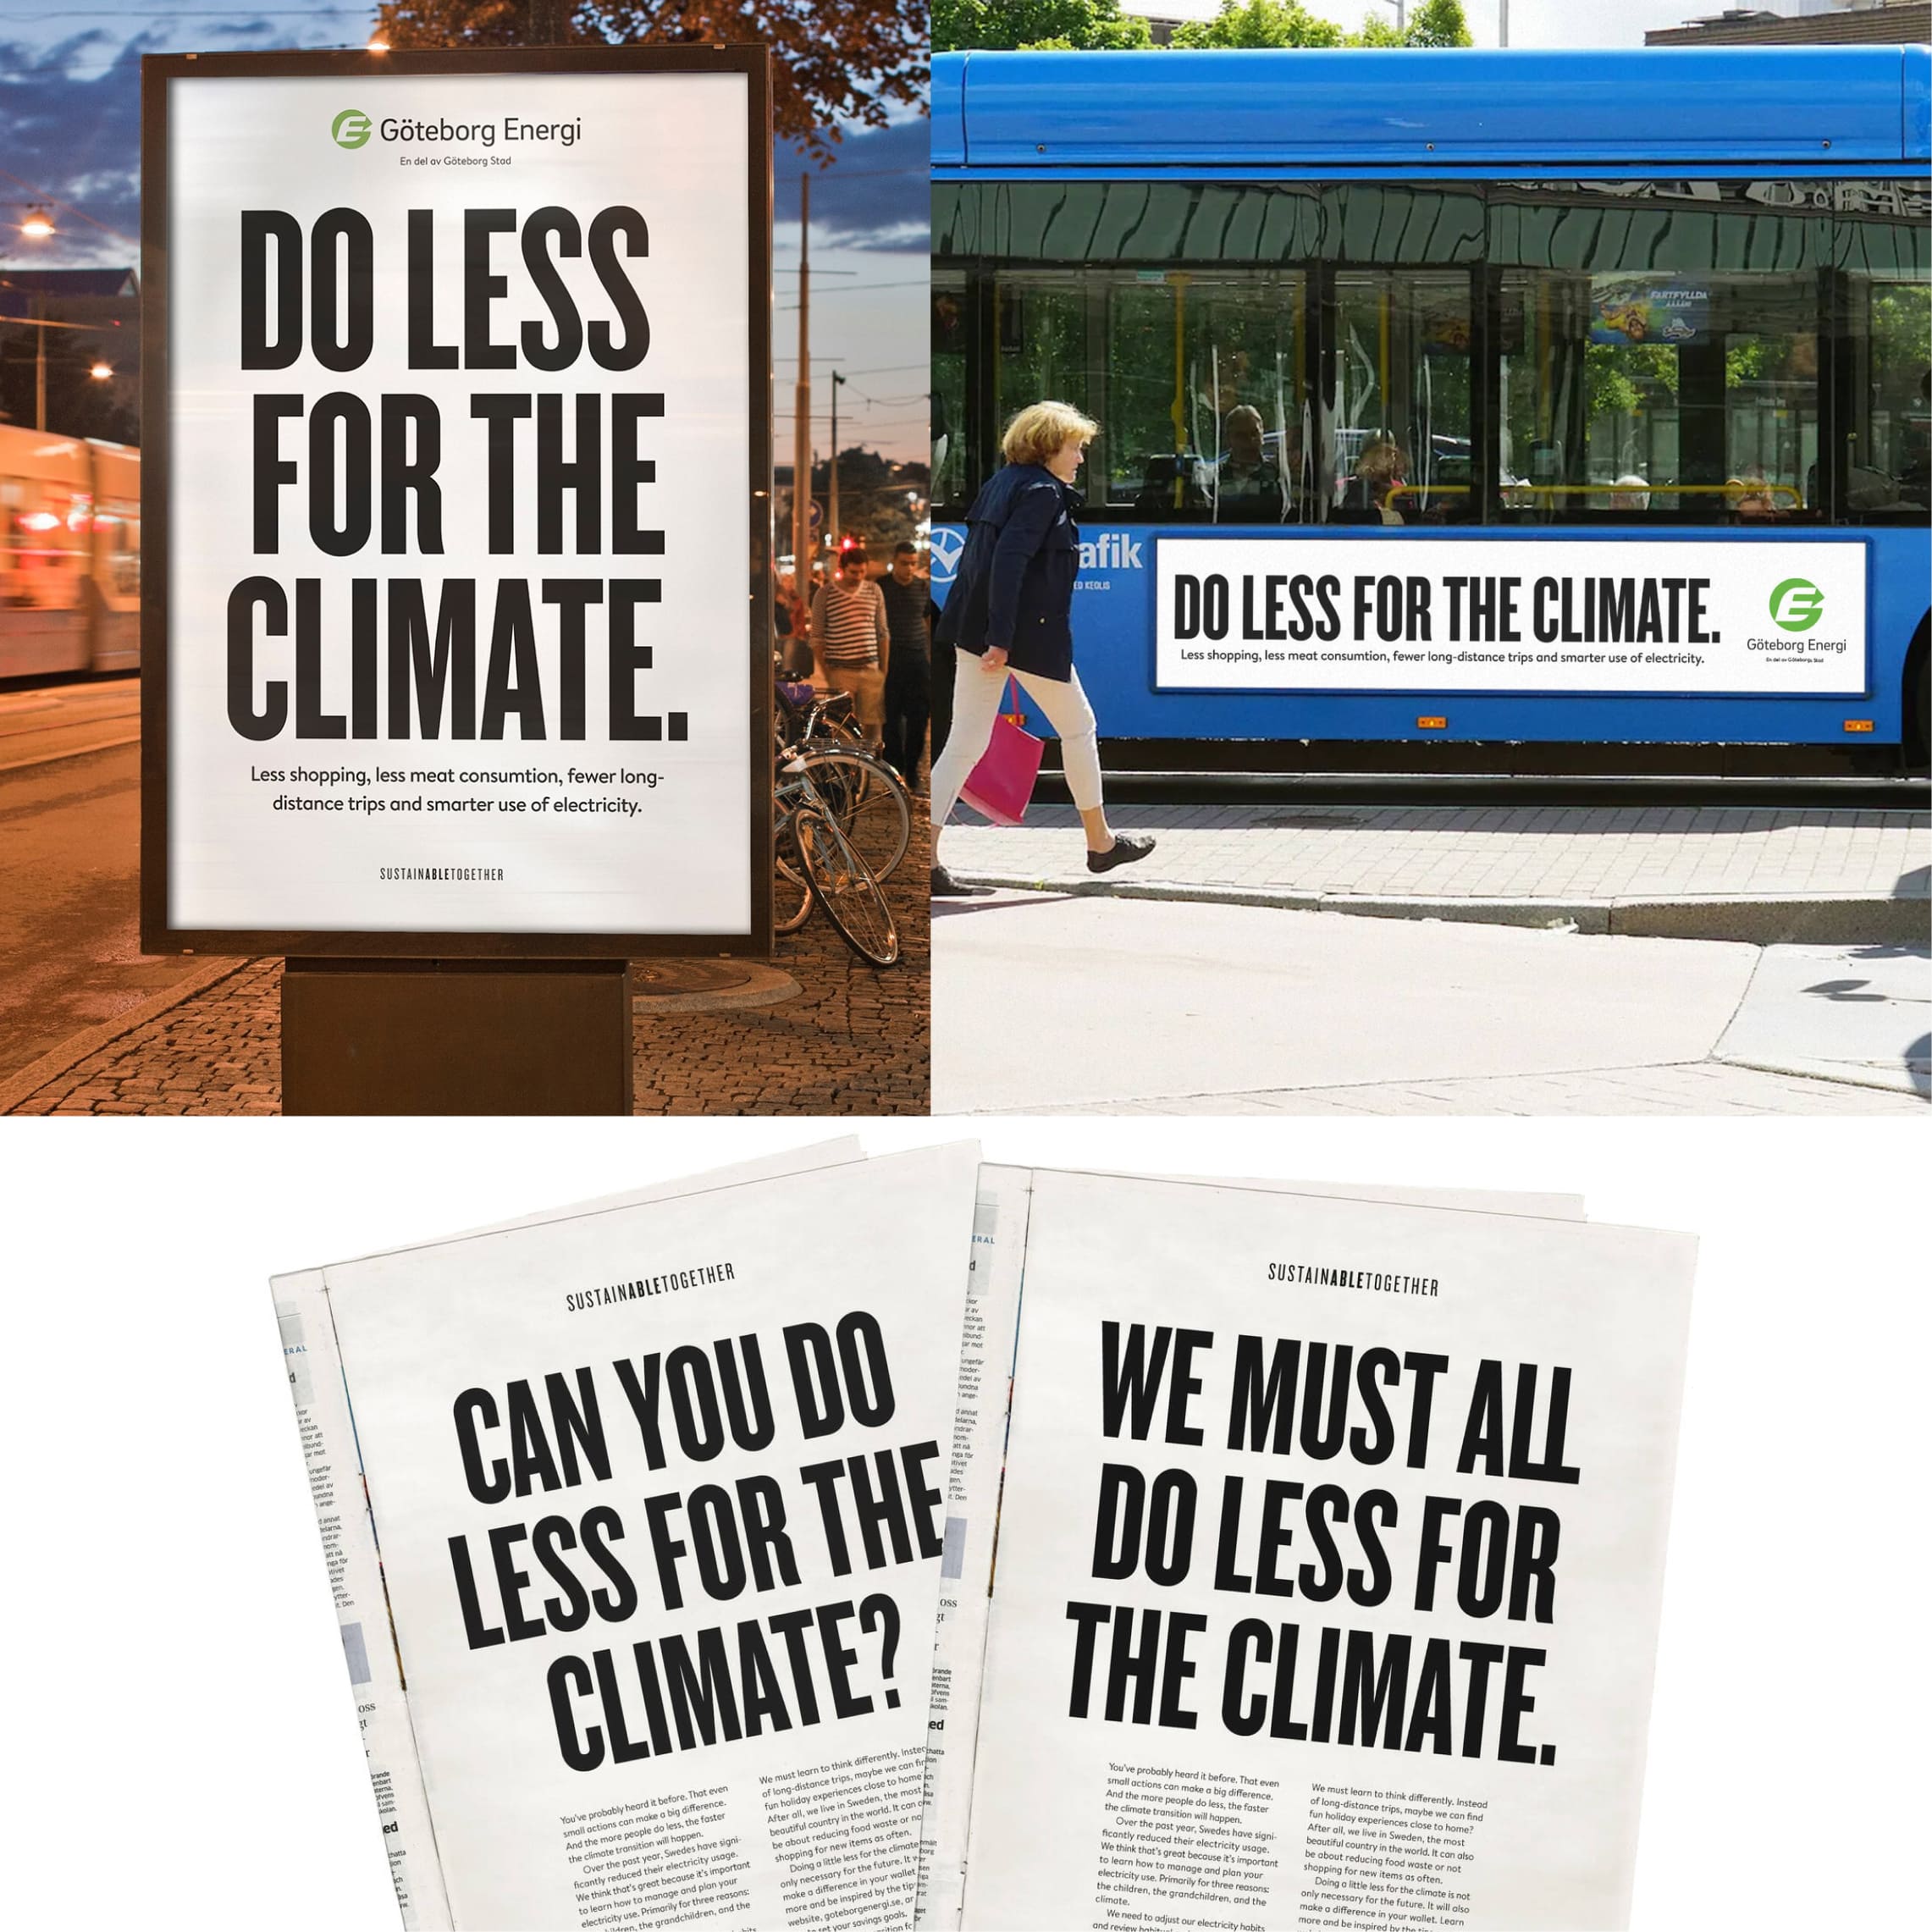 This image is a composite of three photographs, all featuring a similar theme for a climate change campaign. The top left shows a large advertisement board on a sidewalk next to a bicycle stand. It displays a message from Göteborg Energi, reading "DO LESS FOR THE CLIMATE" in bold, black, uppercase letters, with a subtext that suggests less shopping, meat consumption, fewer long-distance trips, and smarter use of electricity. The logo of Göteborg Energi is visible in the top right corner of the ad. In the top right photo, a blue tram is seen passing by, with an advertisement from the same campaign on its side. The ad mirrors the message of the board, but the text is white on a dark background, and the Göteborg Energi logo is positioned at the bottom. The bottom part of the image shows three overlapping newspapers with the campaign's message printed across the fold. It reads, "CAN YOU DO LESS FOR THE CLIMATE?" and "WE MUST ALL DO LESS FOR THE CLIMATE." The text is in large, bold, black letters, and the hashtag #SUSTAINABLETOGETHER is just visible at the bottom of the page.